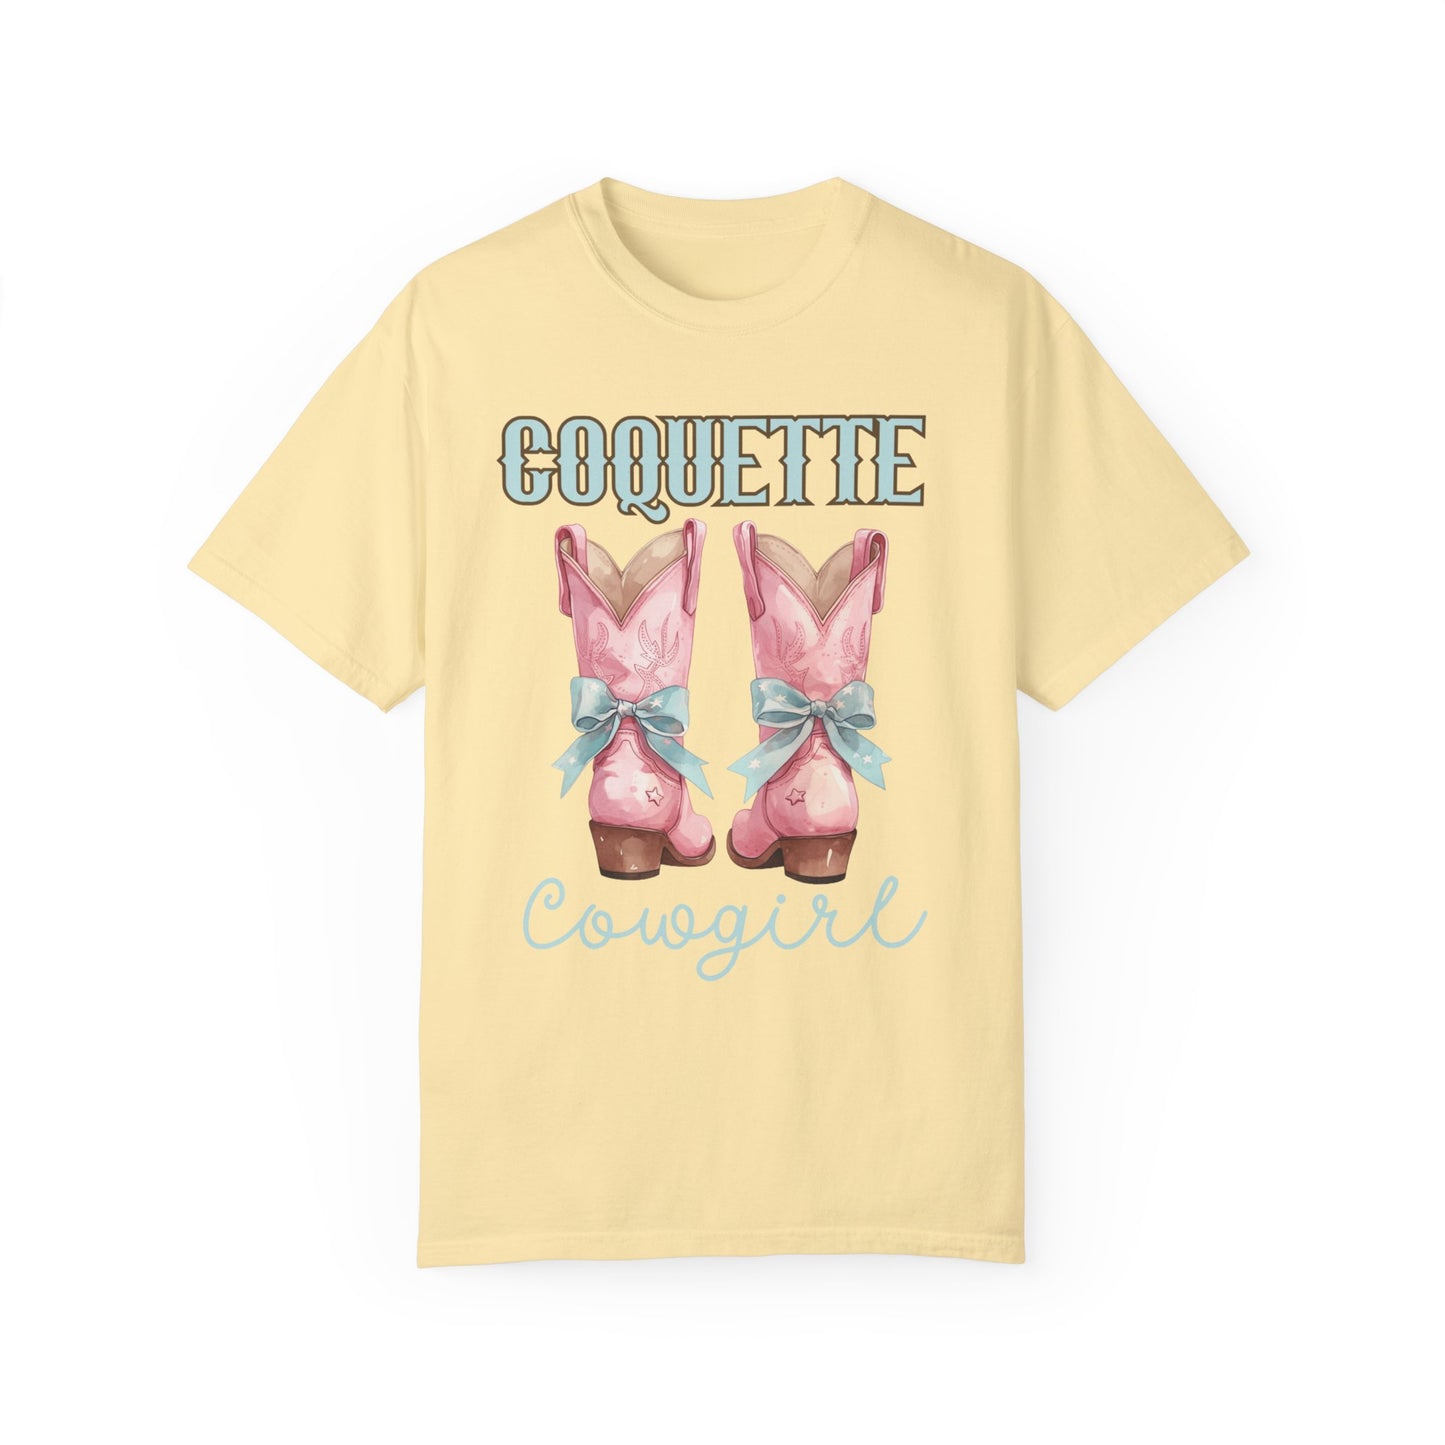 Coquette Cowgirl oversized Comfort Colors tee